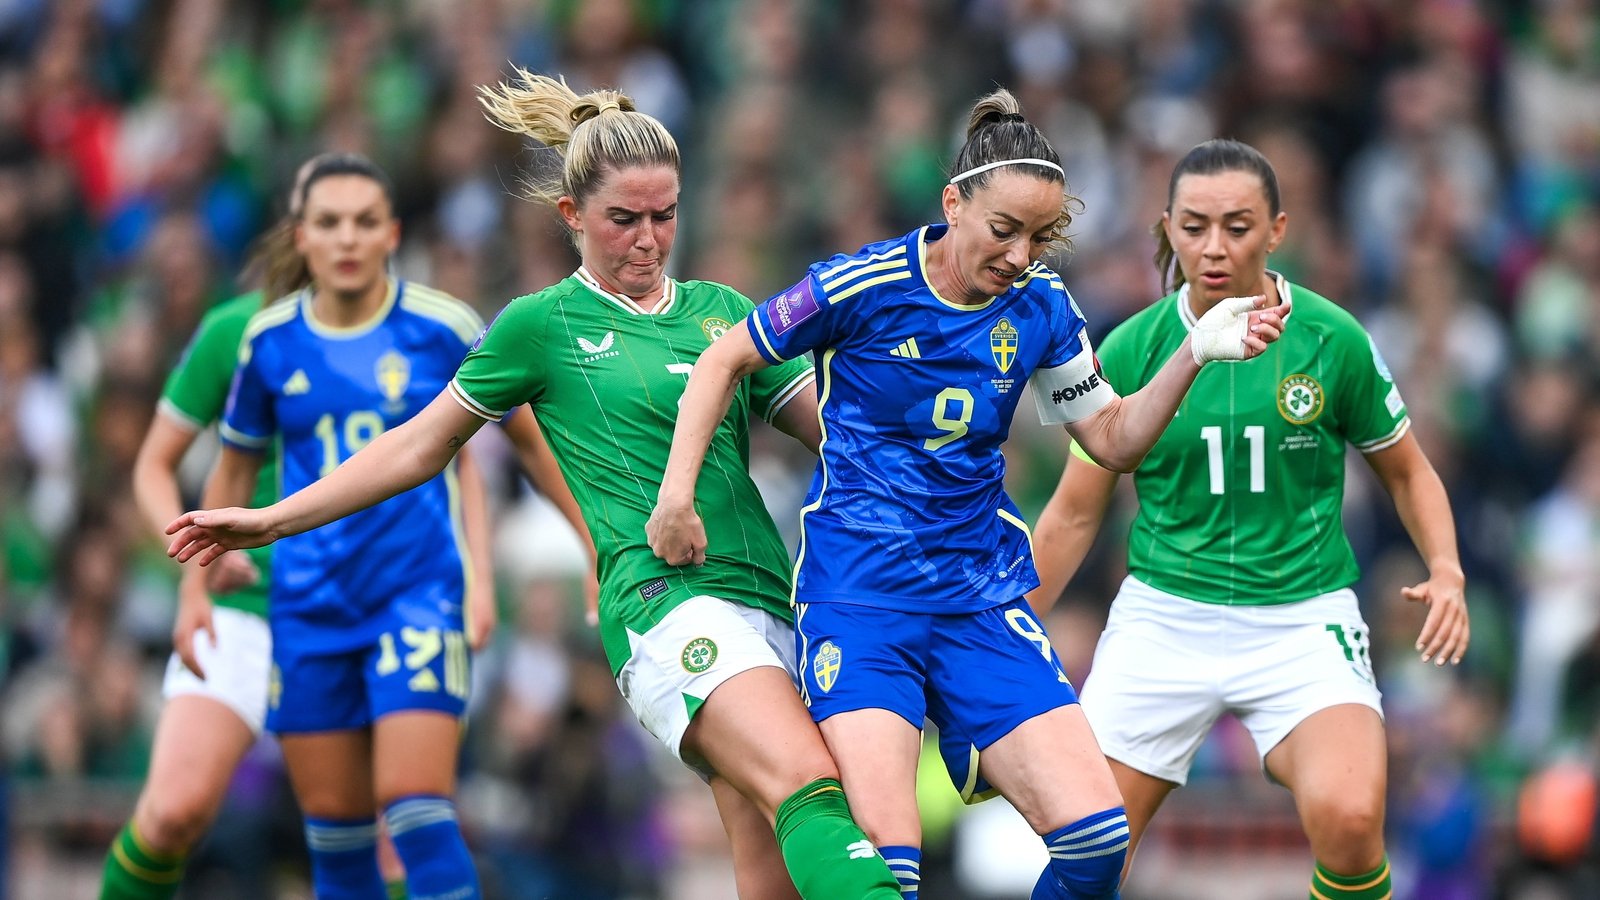 Why Ireland’s WNT has a formidable opponent in Sweden